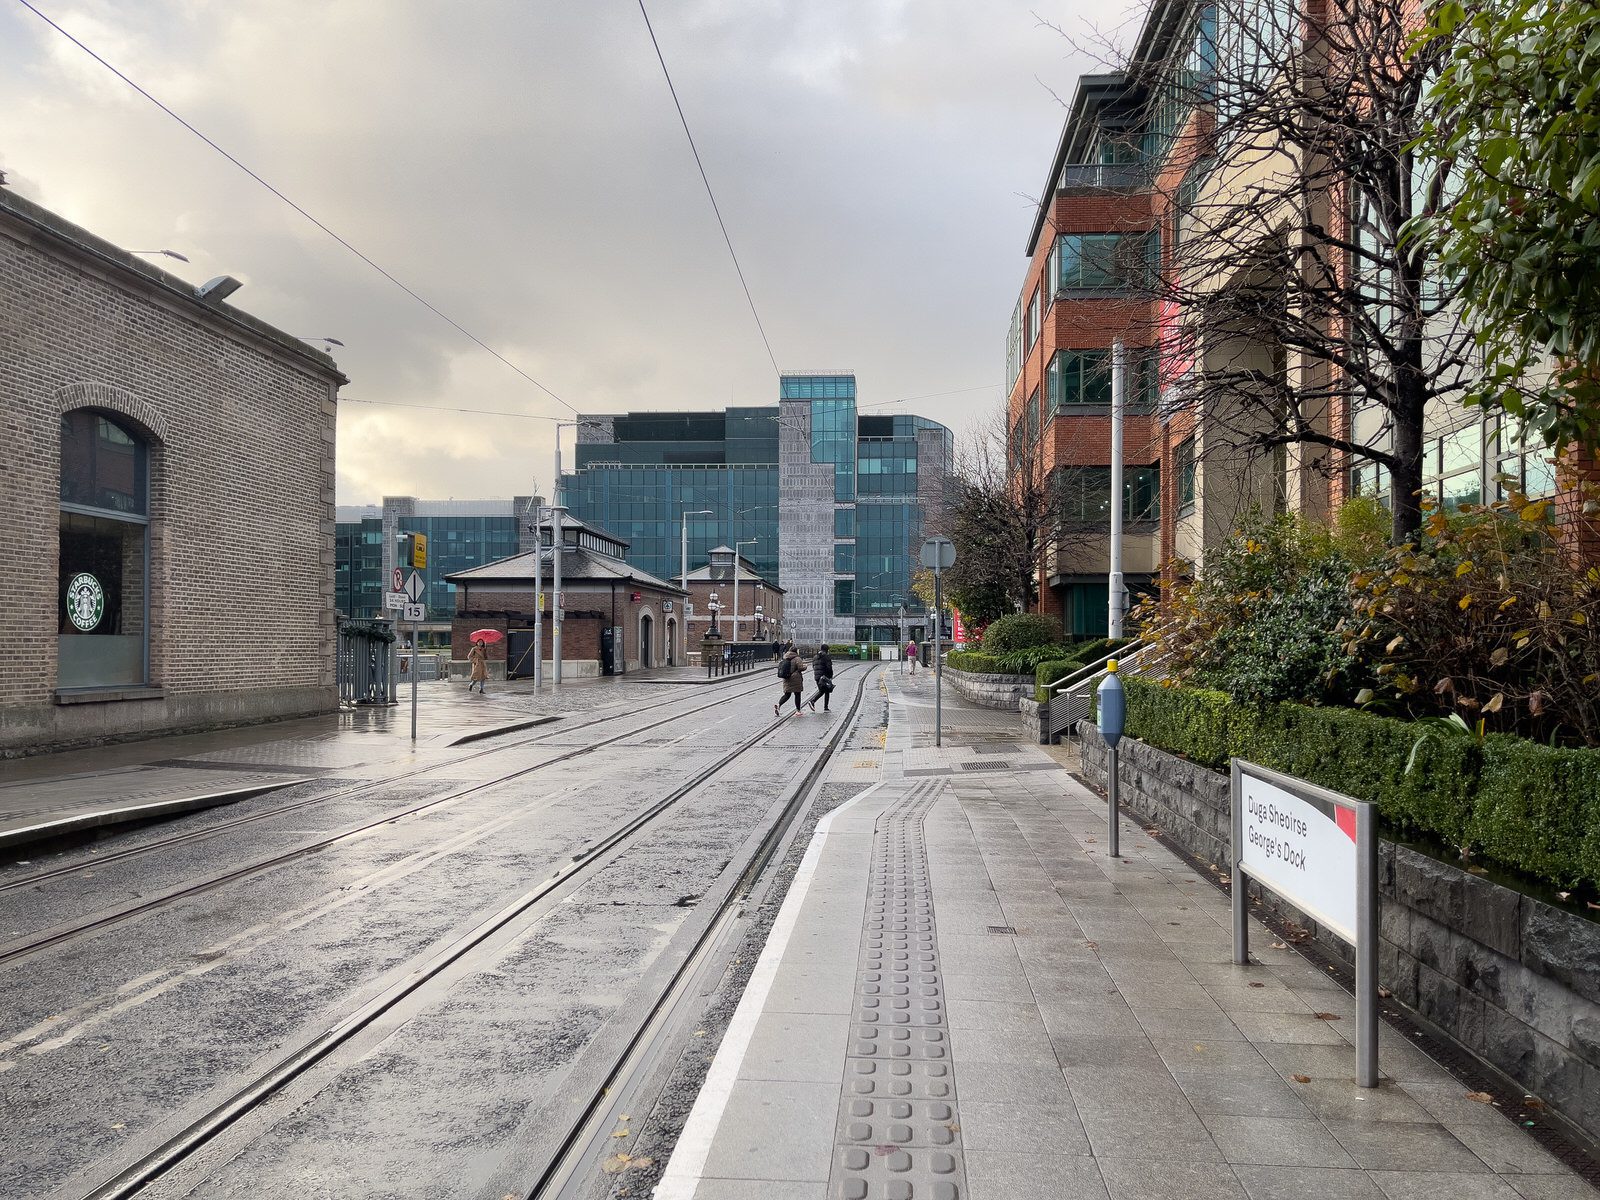 THE LUAS TRAM STOP AT GEORGE'S DOCK 004